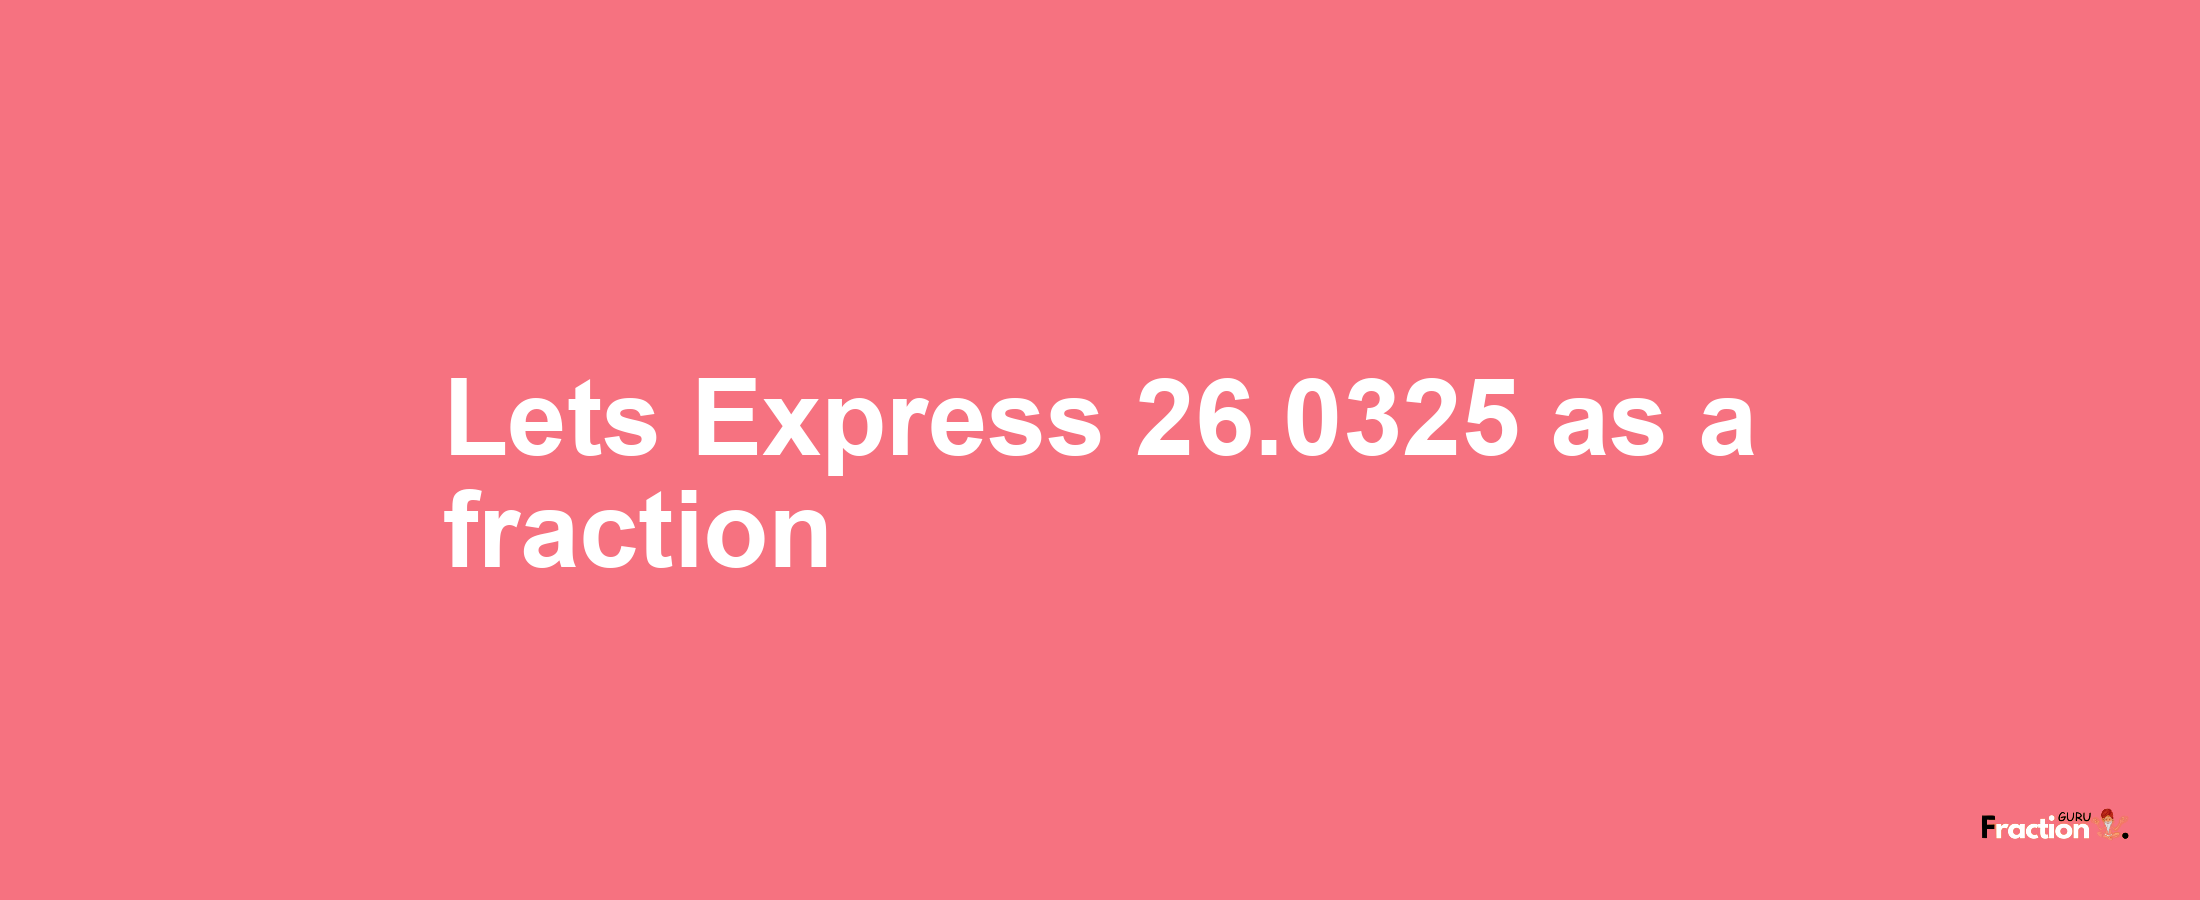 Lets Express 26.0325 as afraction